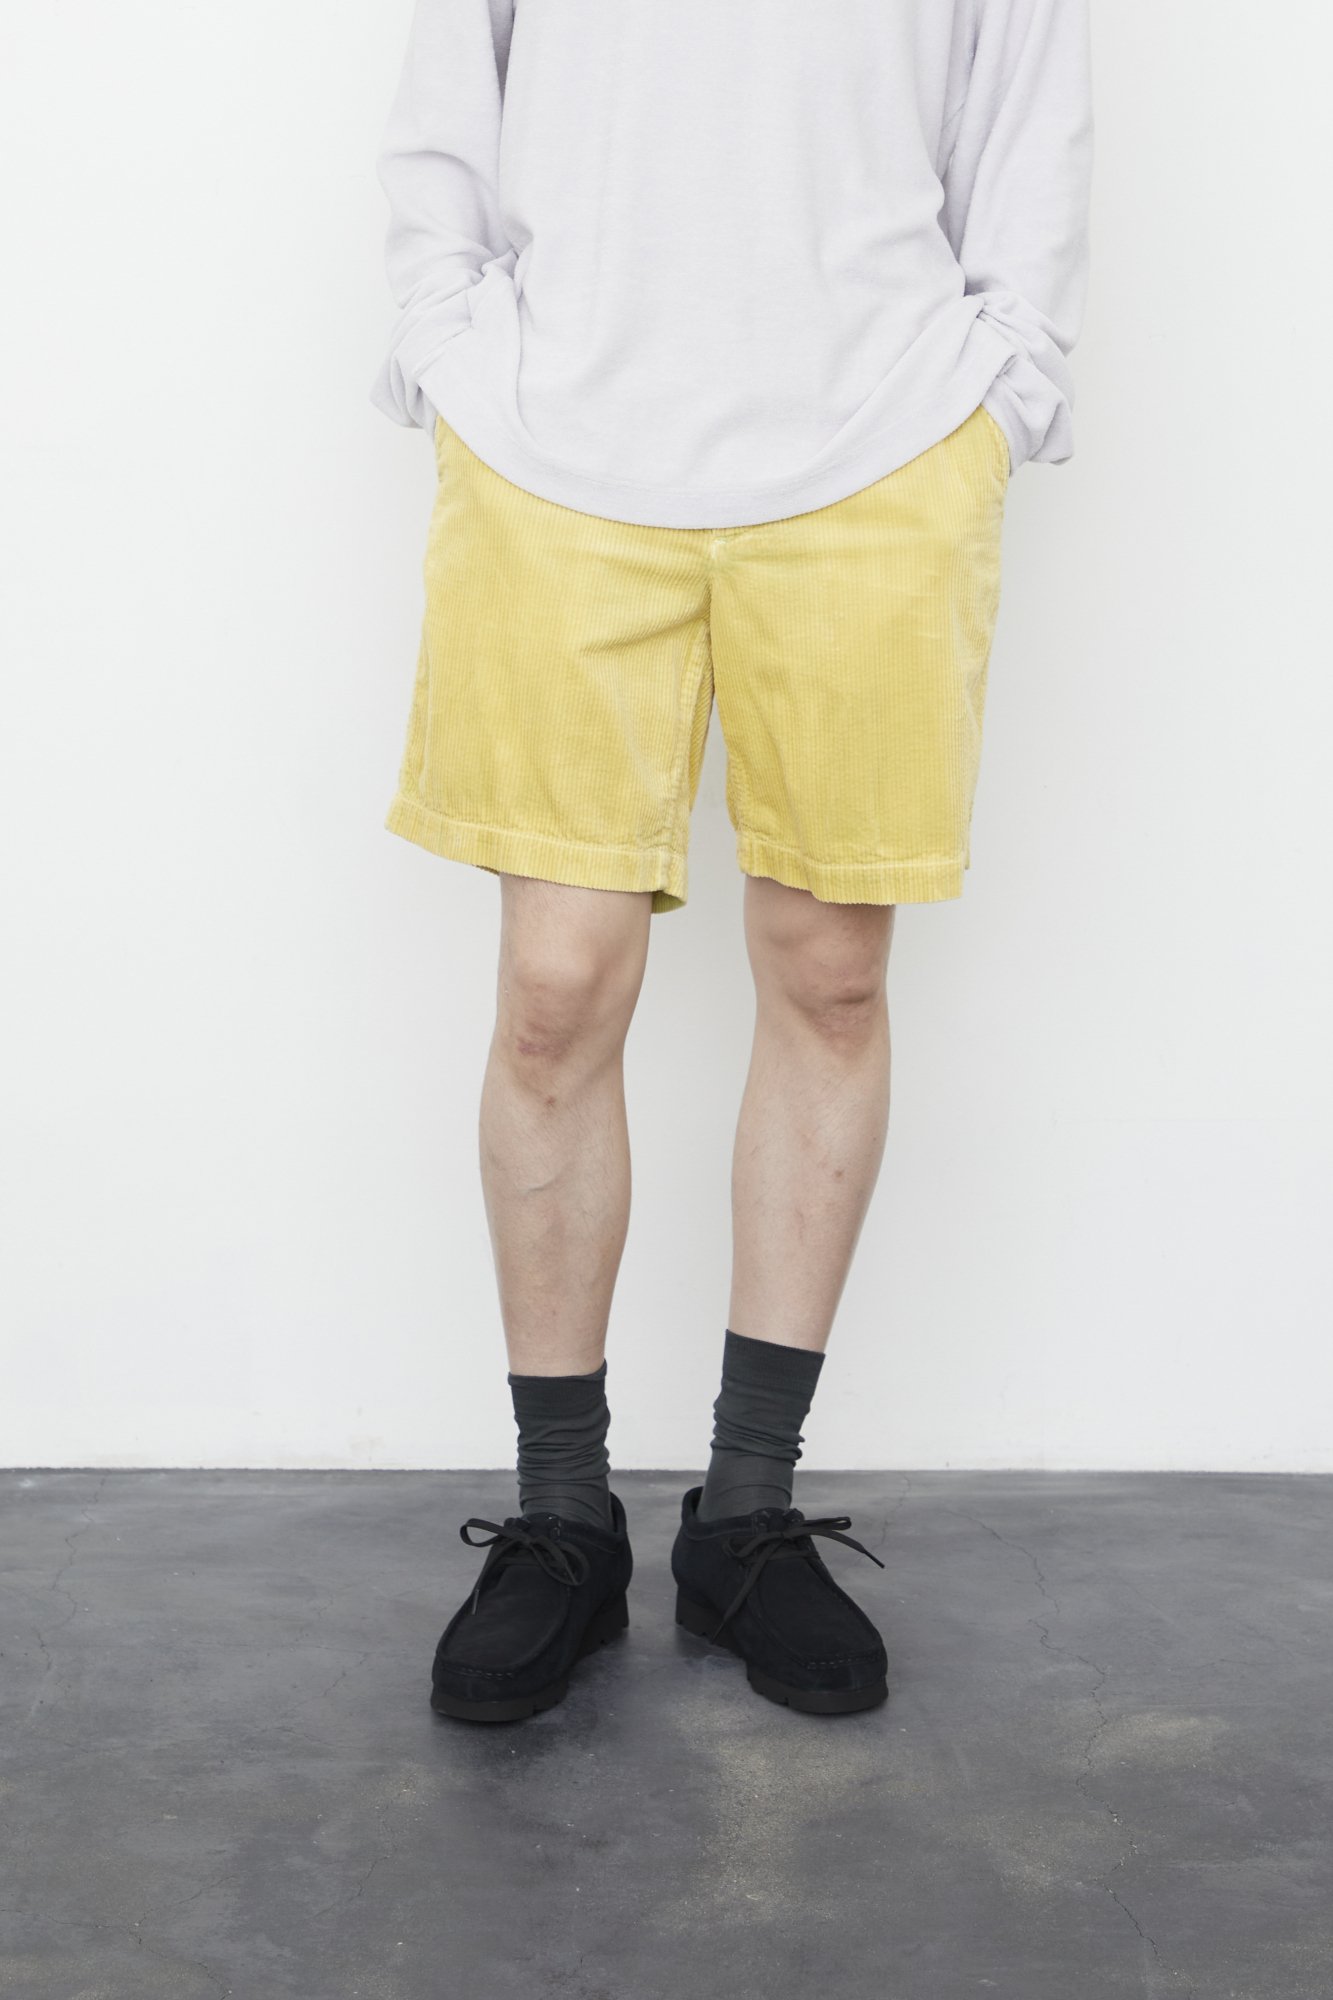 soe<br />Overdyed Corduroy Shorts / YELLOW<img class='new_mark_img2' src='https://img.shop-pro.jp/img/new/icons47.gif' style='border:none;display:inline;margin:0px;padding:0px;width:auto;' />